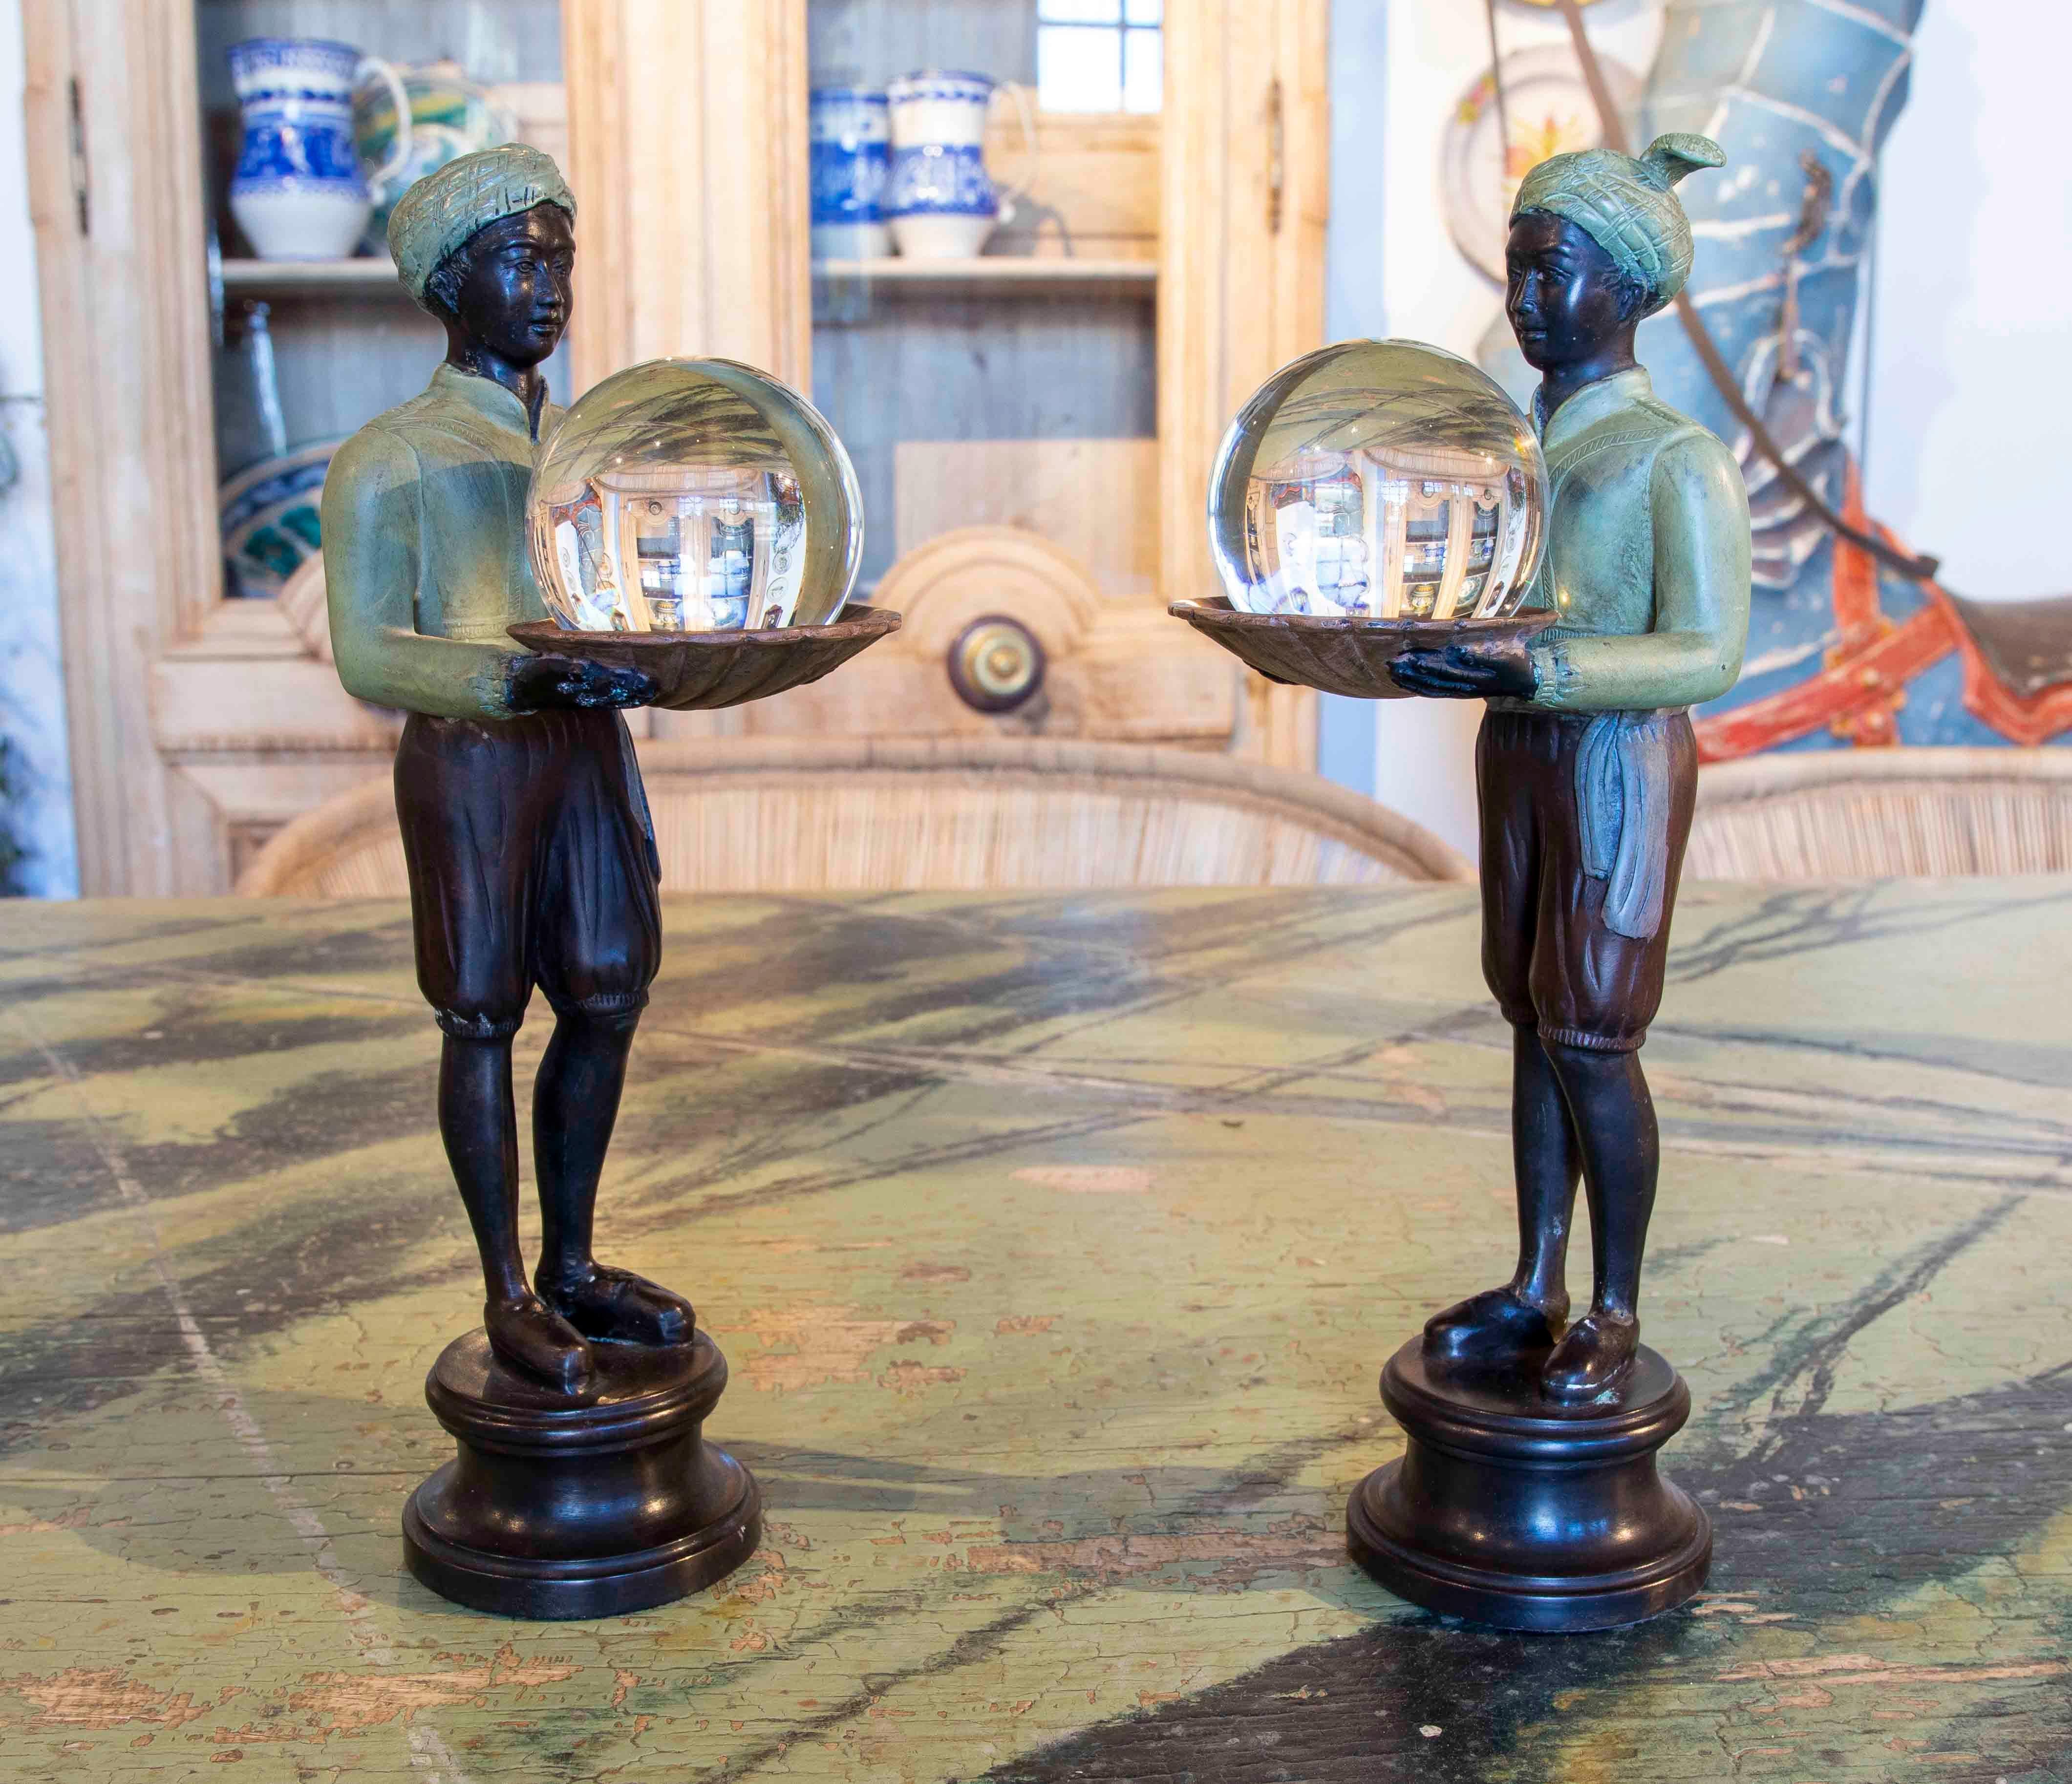 Pair of bronze figurines of characters with tray and crystal ball.